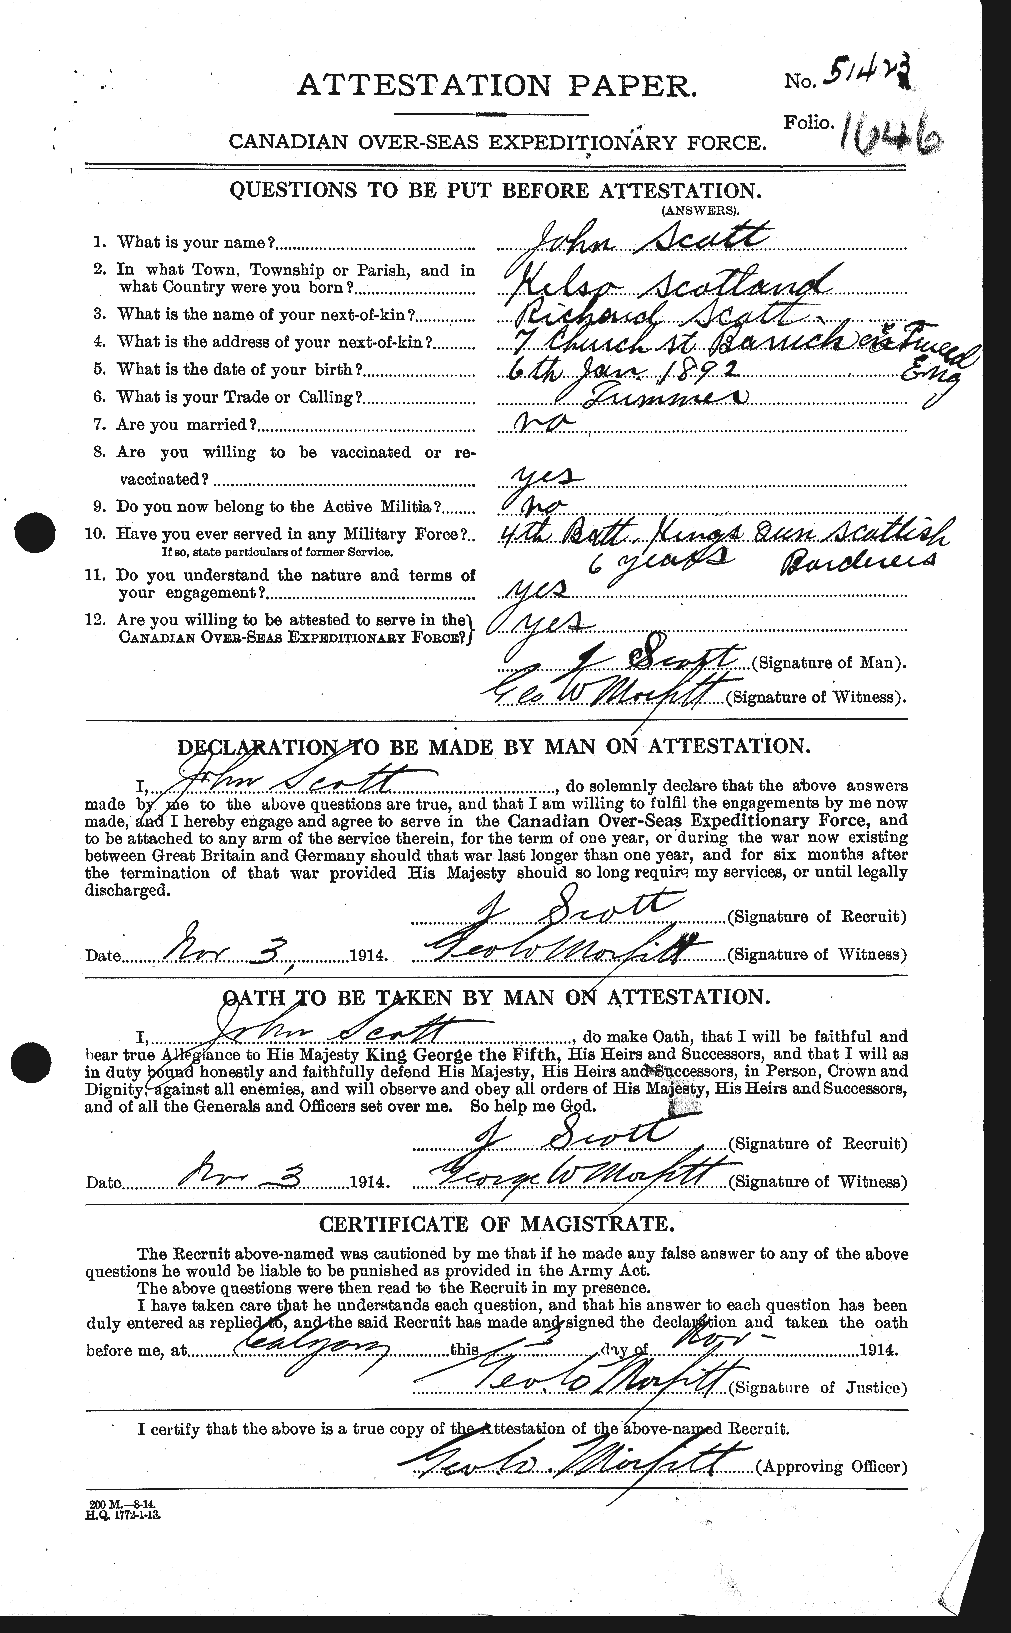 Personnel Records of the First World War - CEF 084897a